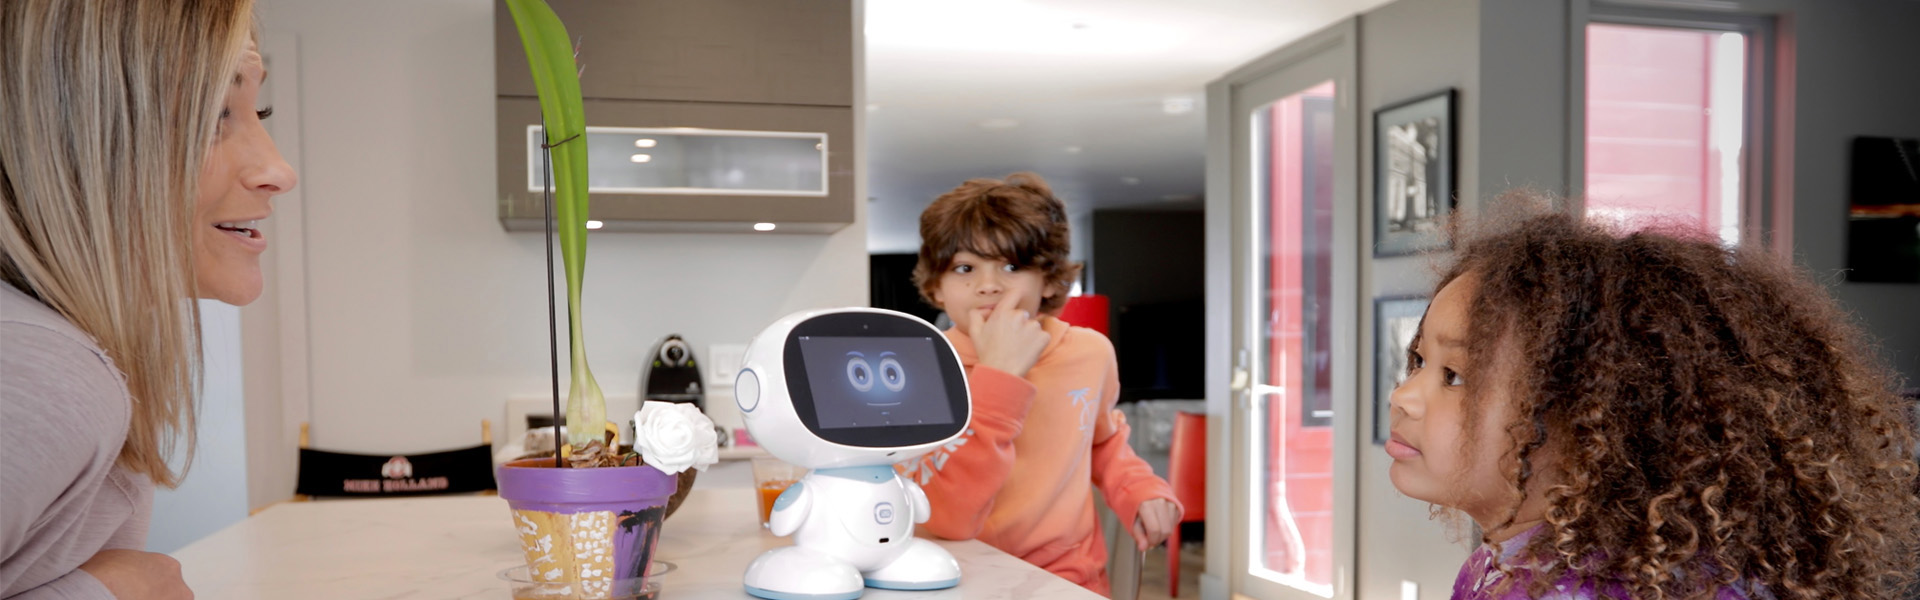 Why Parent Your Kids When This Robot Nanny Can Do the Job for You